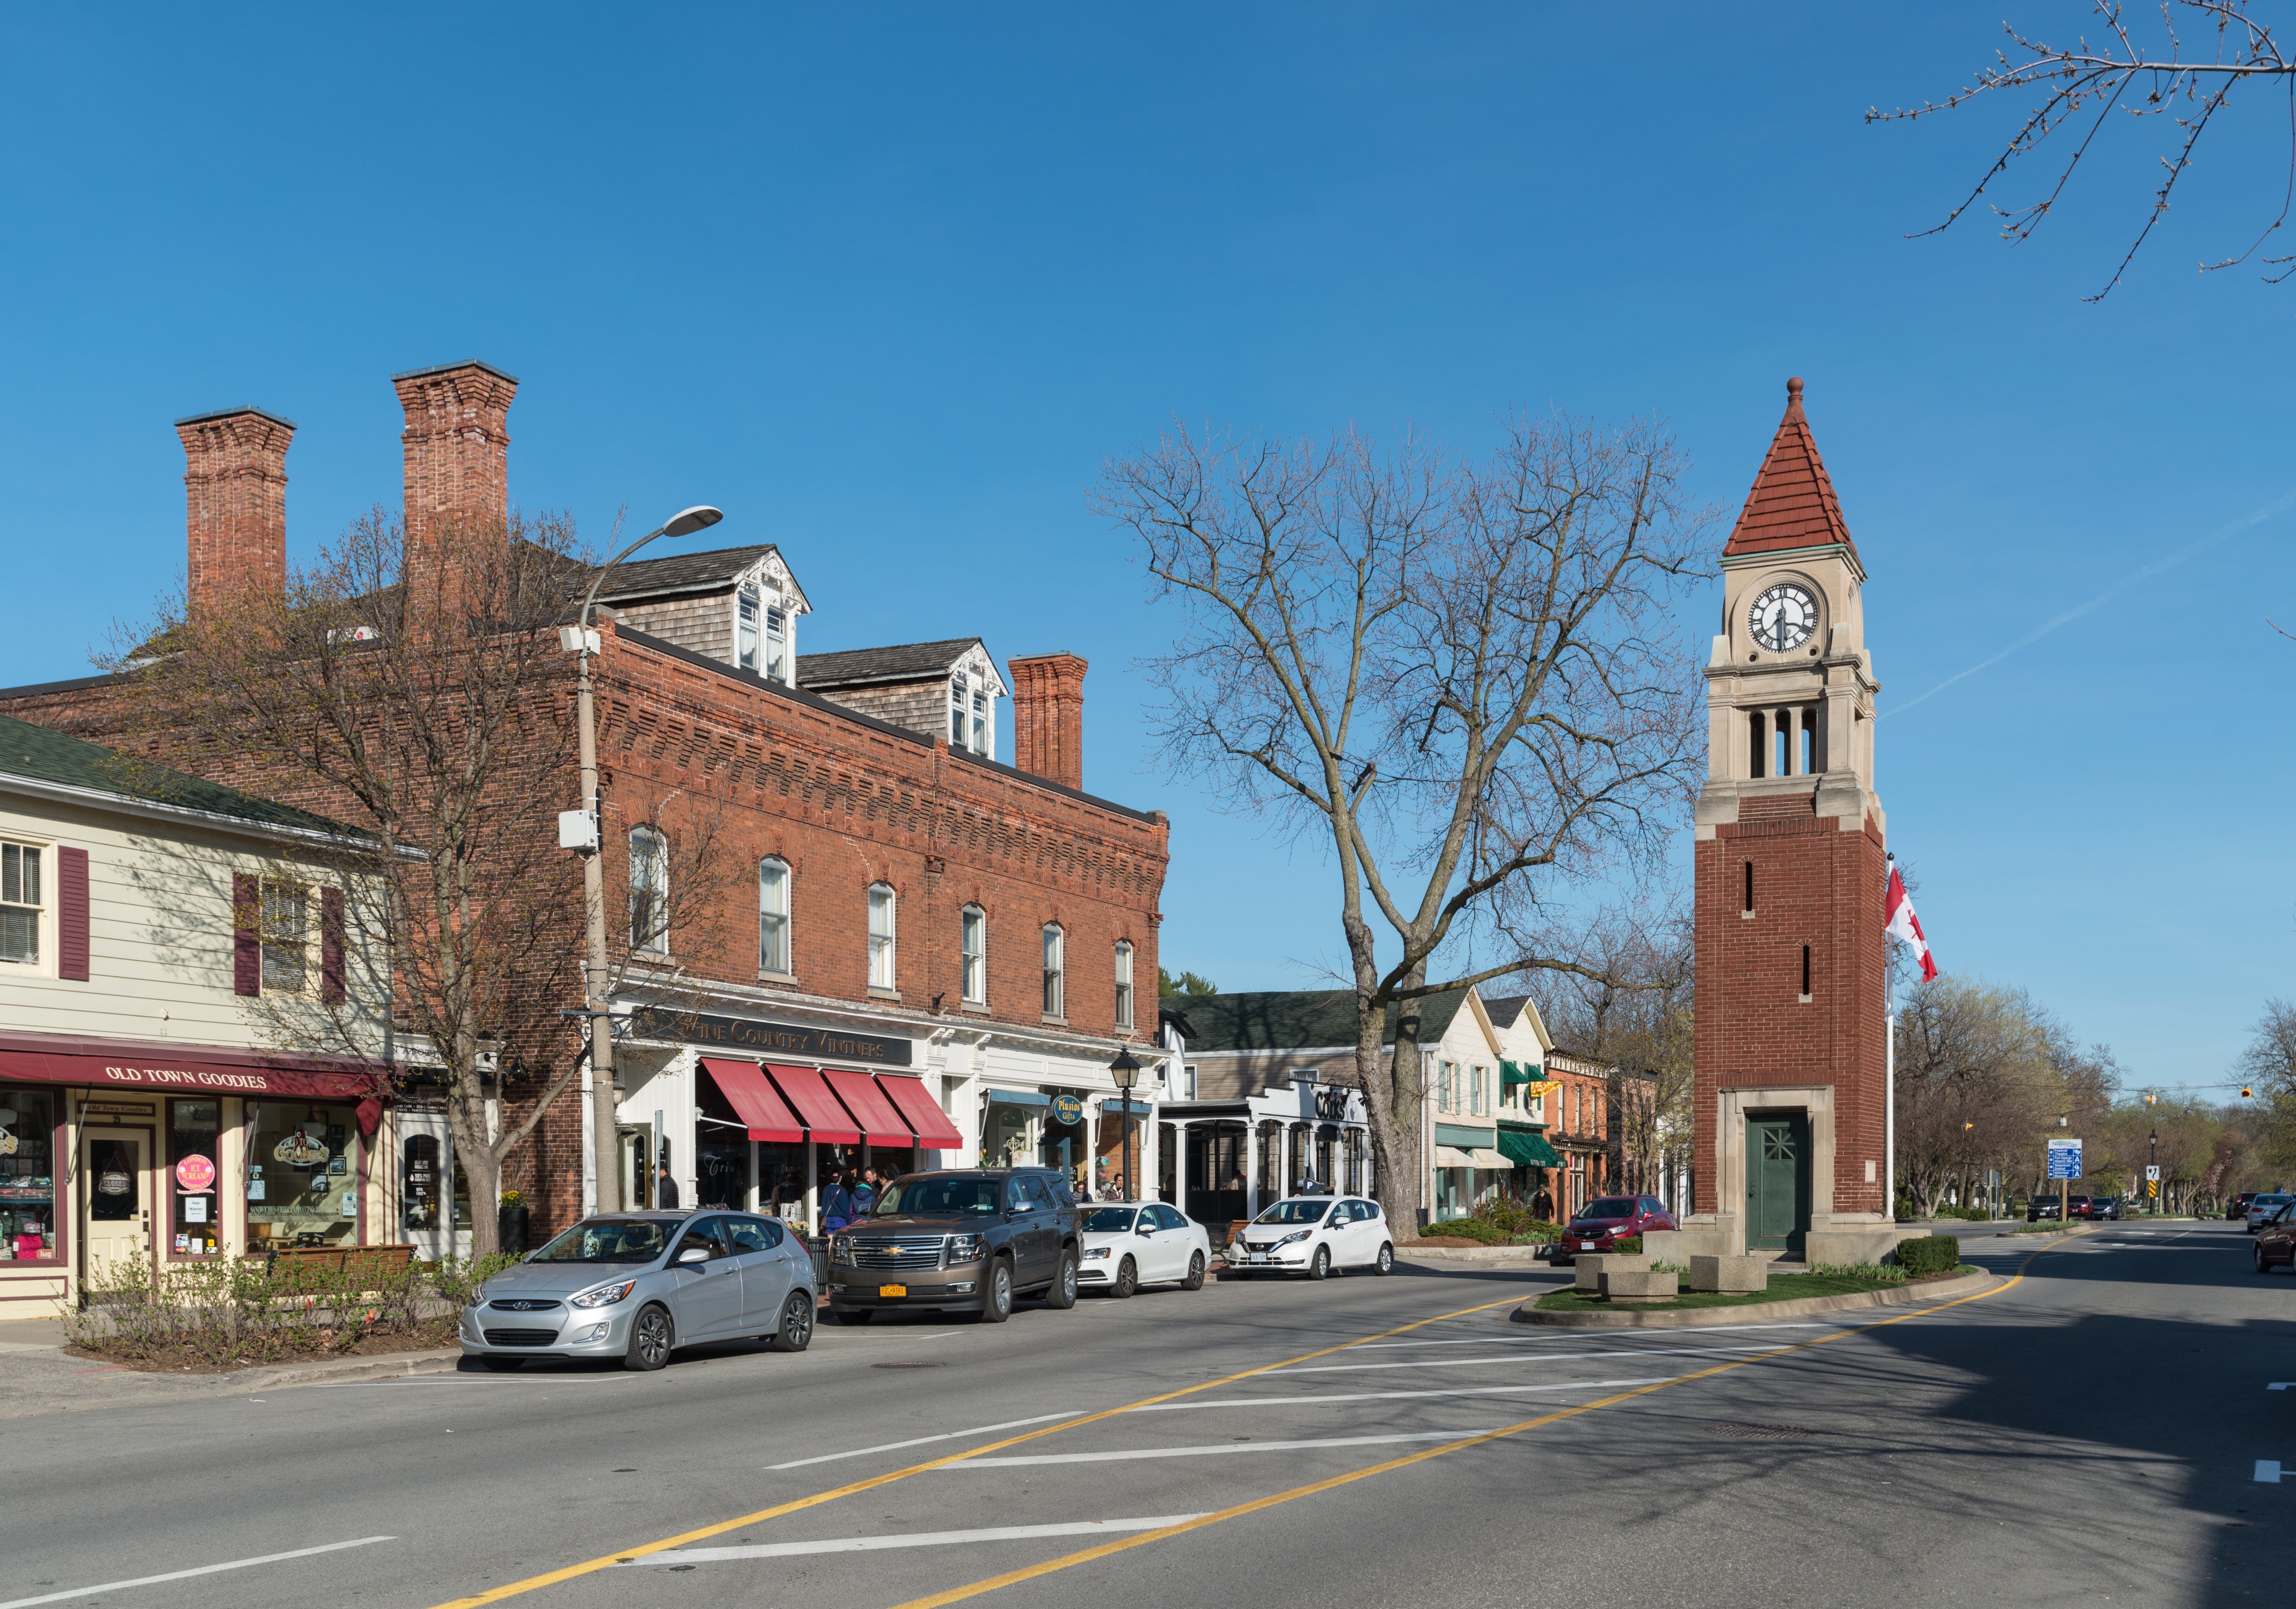 Queen St and Clock Tower, Niagara-on-the-Lake 20170418 1